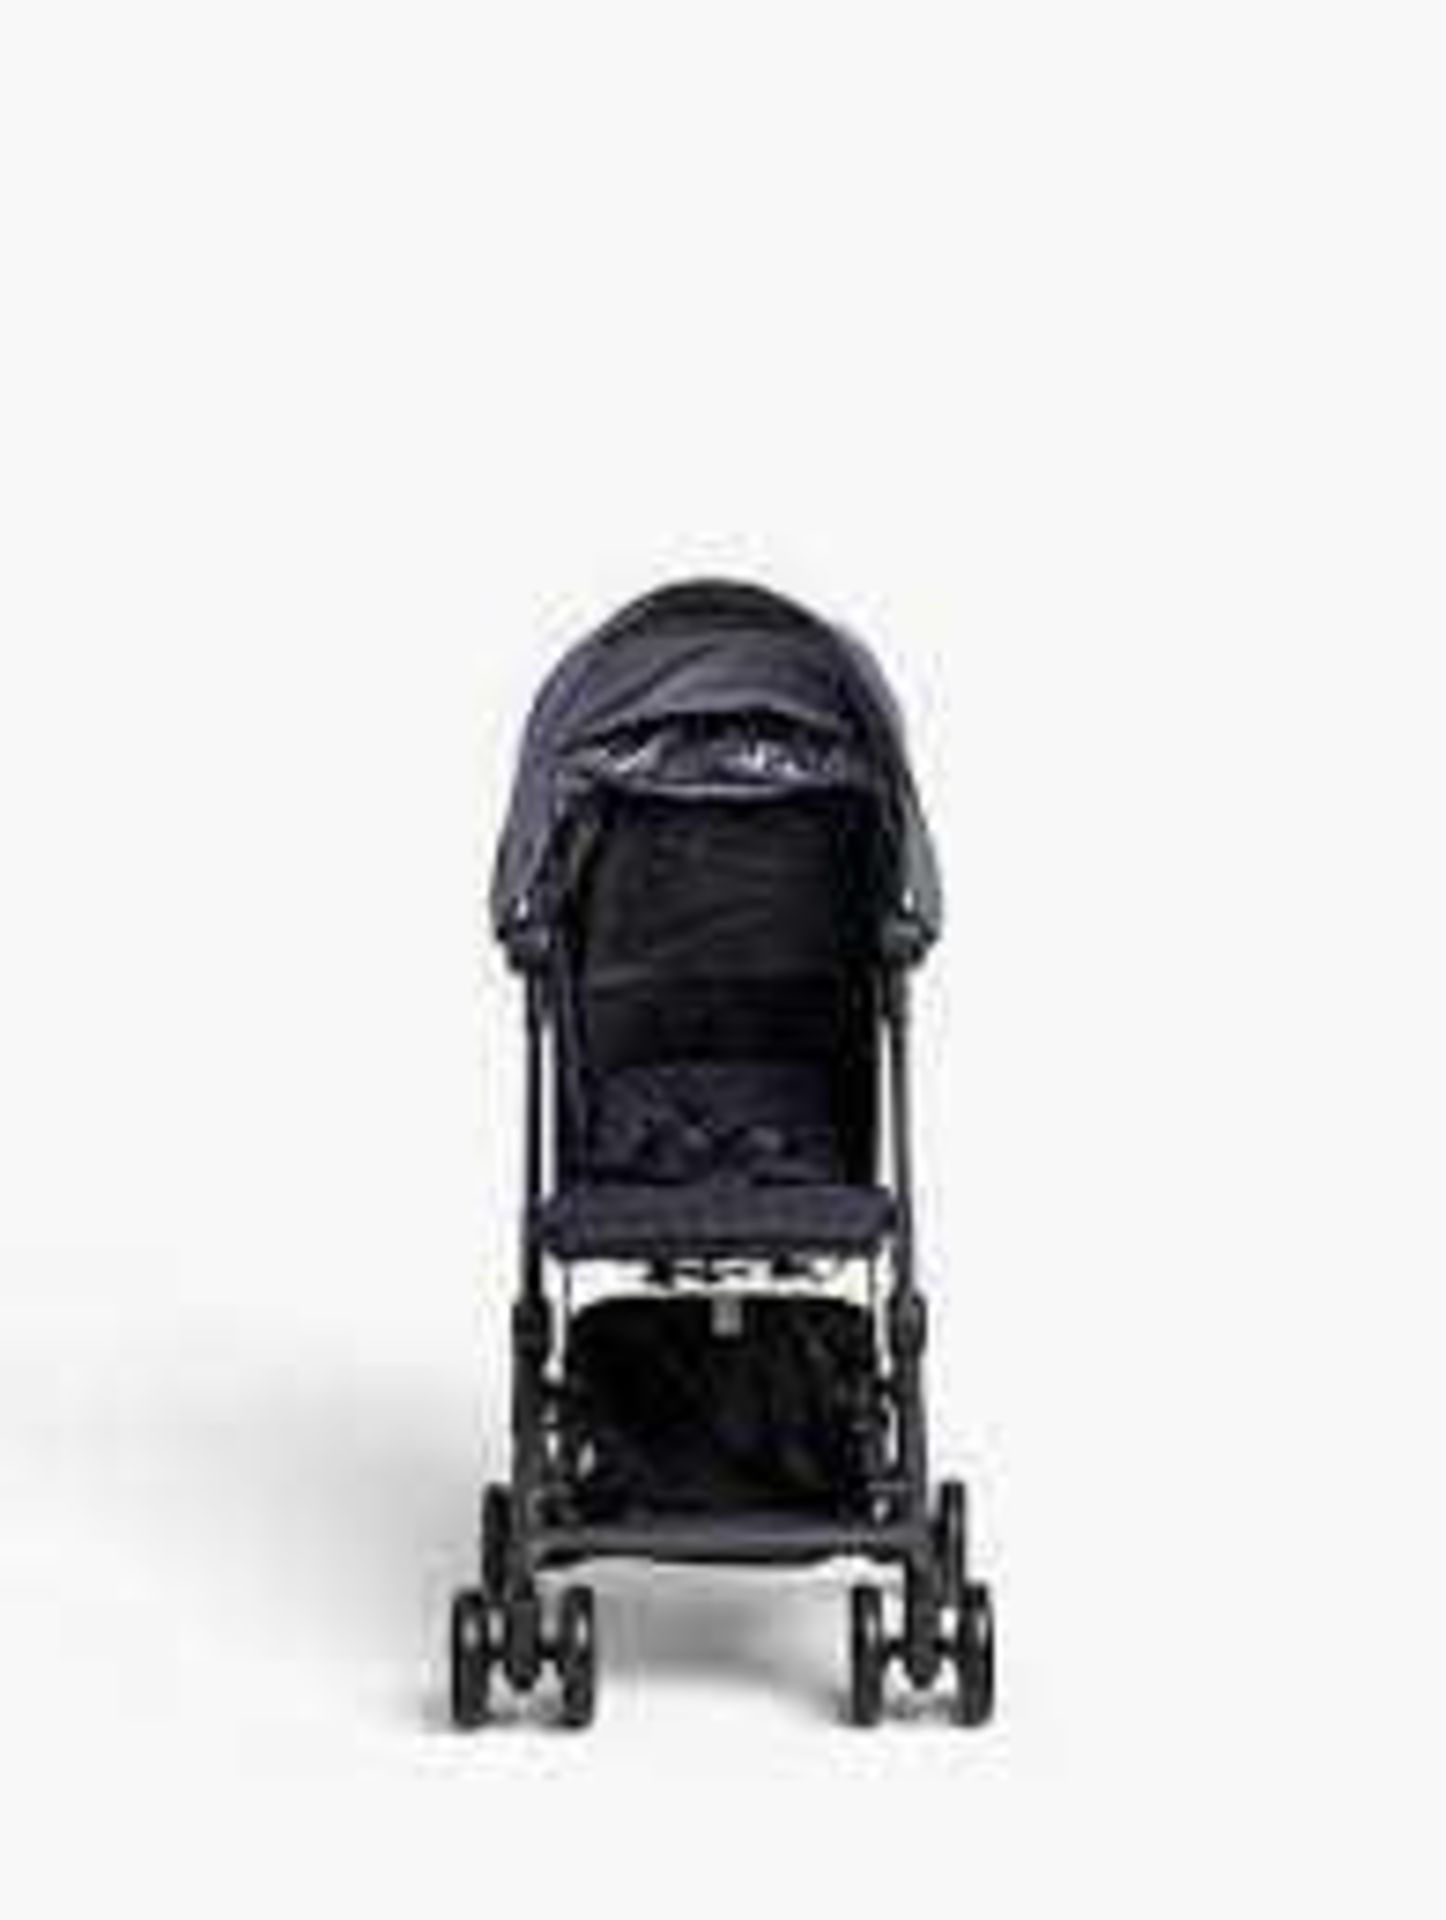 RRP £120 John Lewis And Partners Black Stroller 01487182 (Appraisals Available On Request) (Pictures